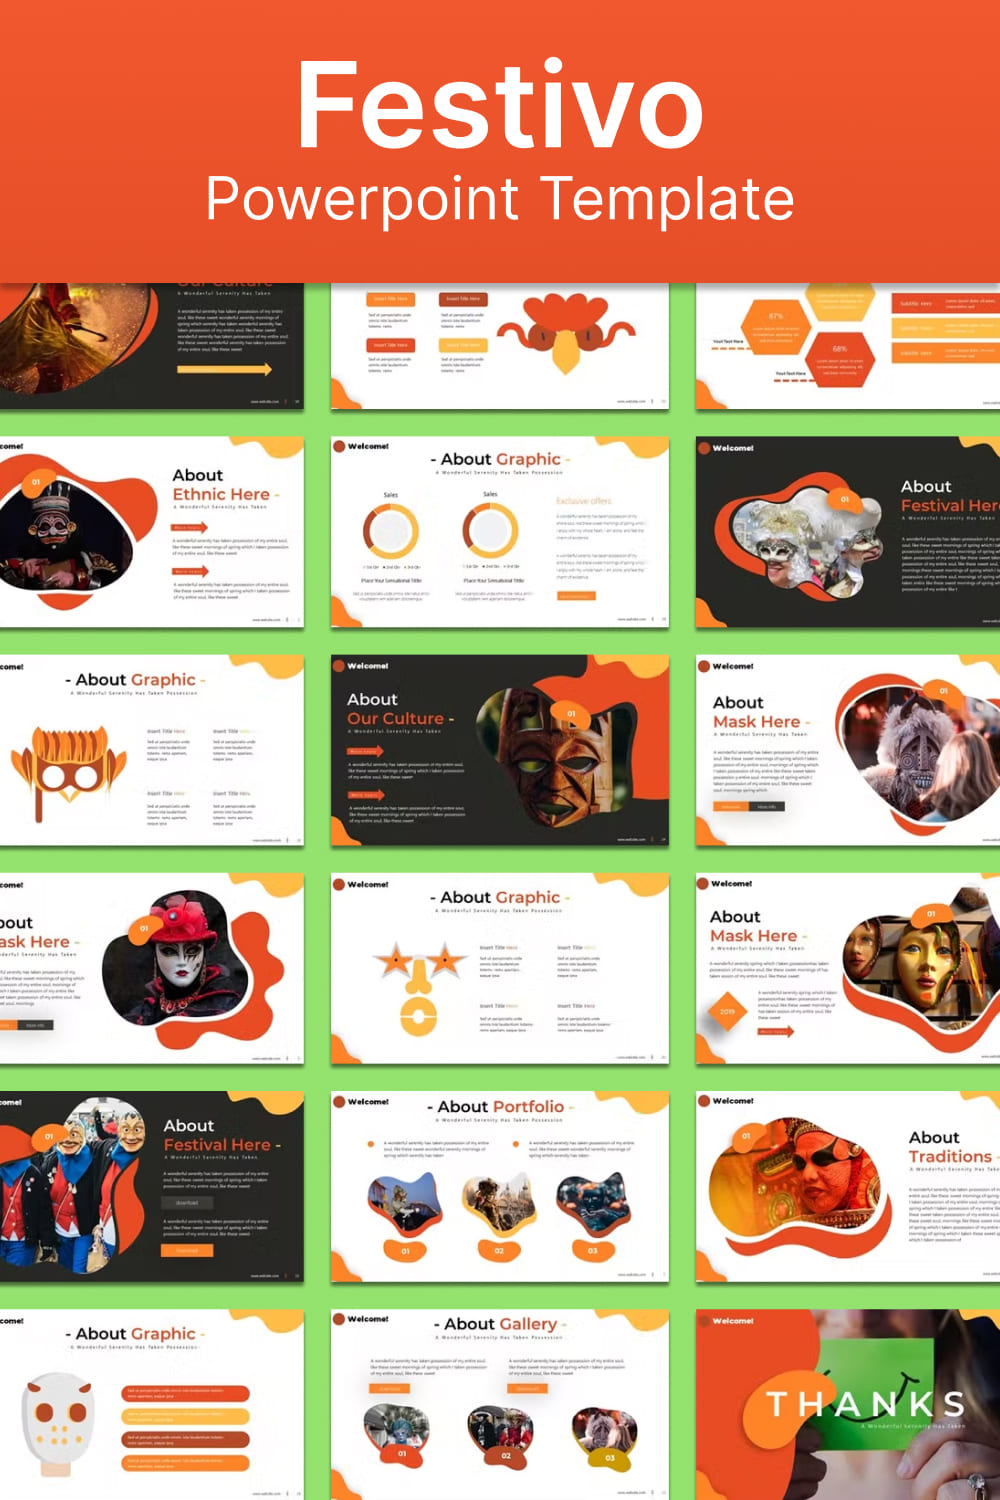 Festivo powerpoint template - pinterest image preview.